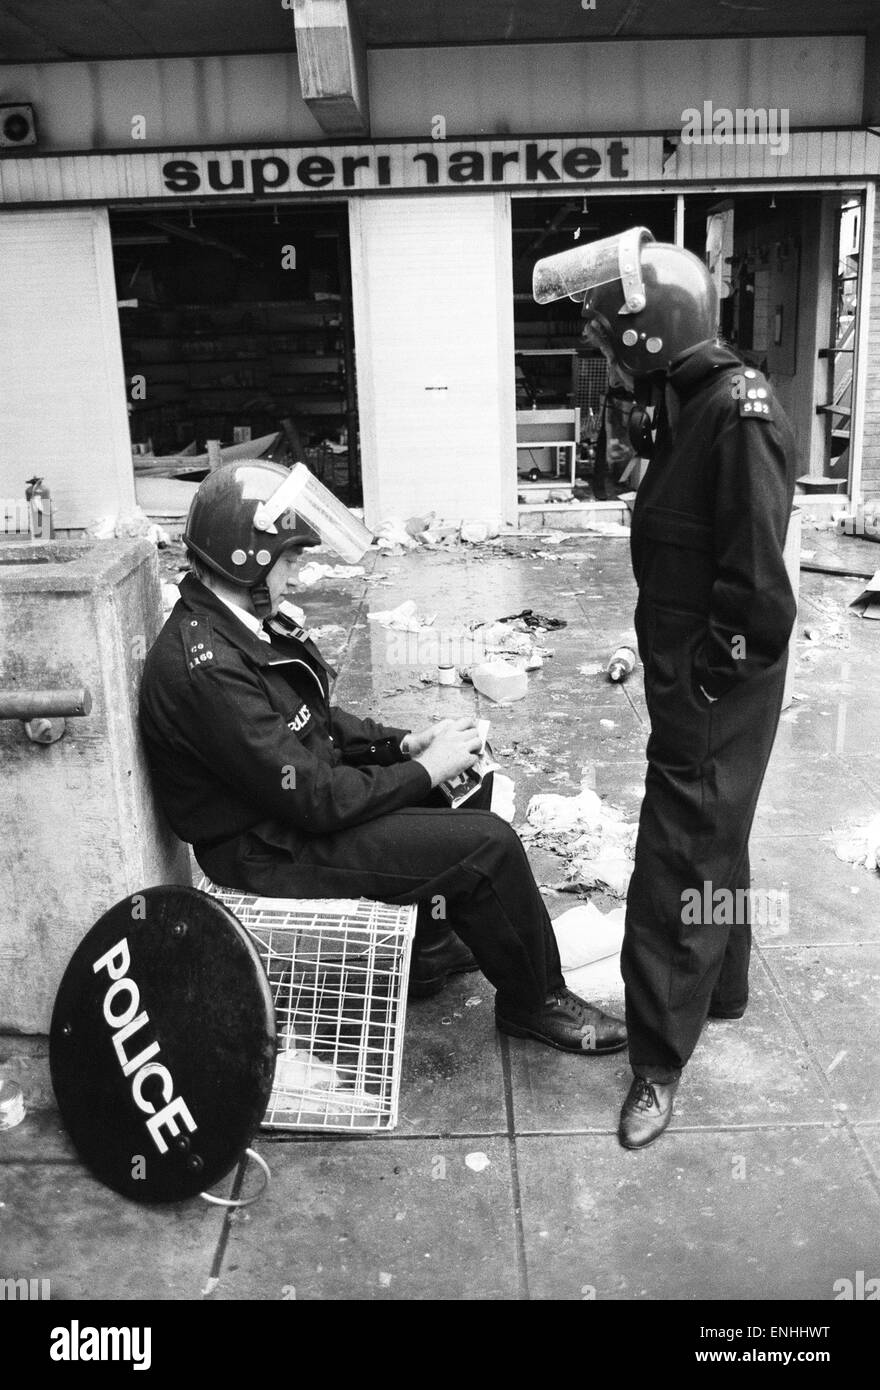 Aftermath of the riots which broke out in the Broadwater Farm estate in Tottenham, North London. The riot started the day after local resident Cynthia Jarrett died during a disturbance while police searched her home. Picture shows riot police taking a res Stock Photo